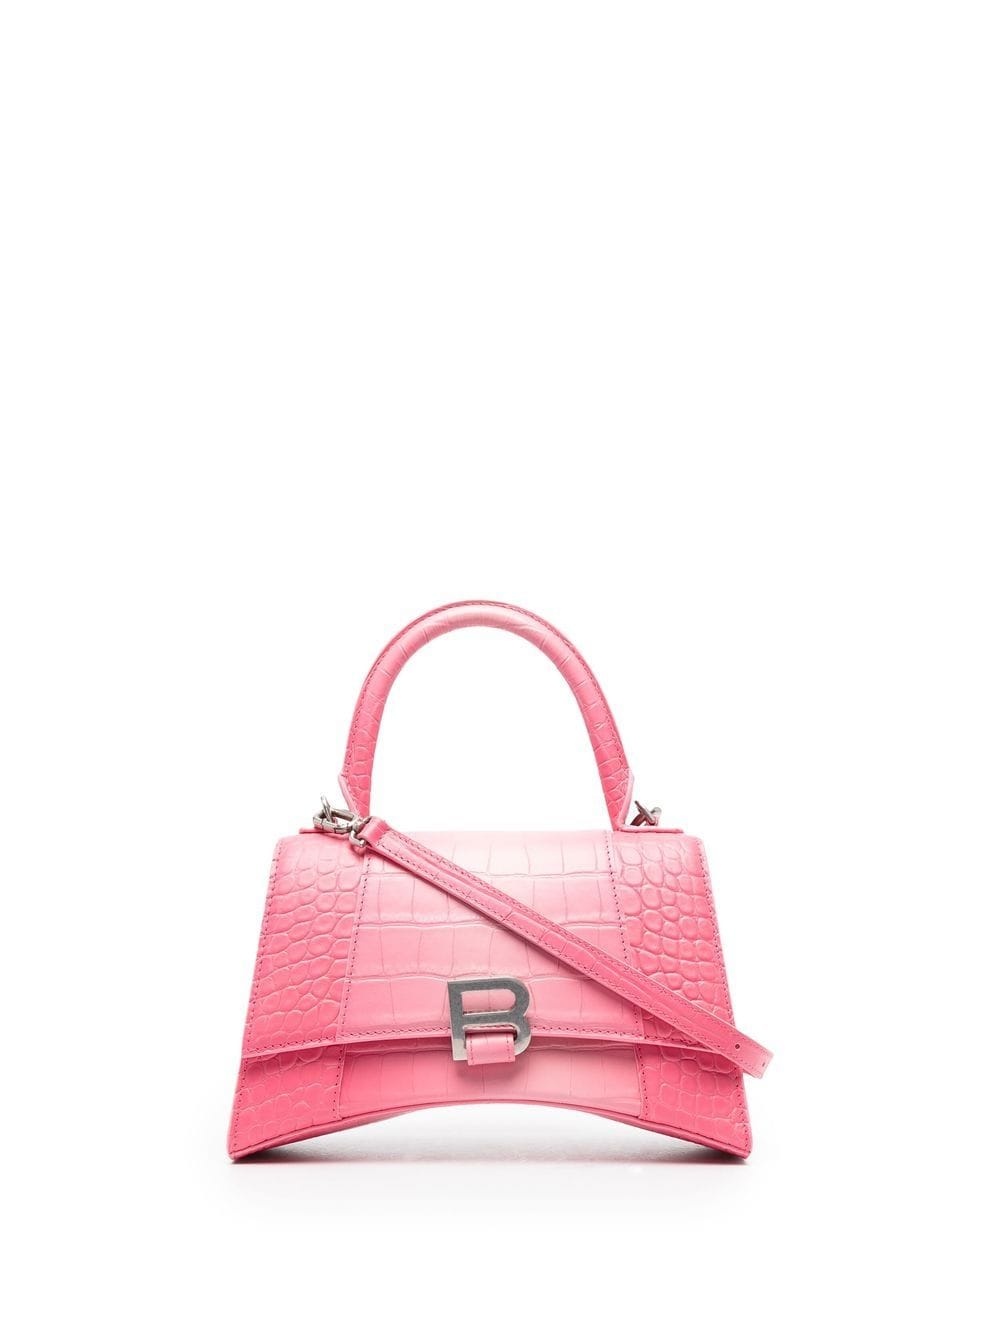 Women's Crush Small Tote Bag in Pink